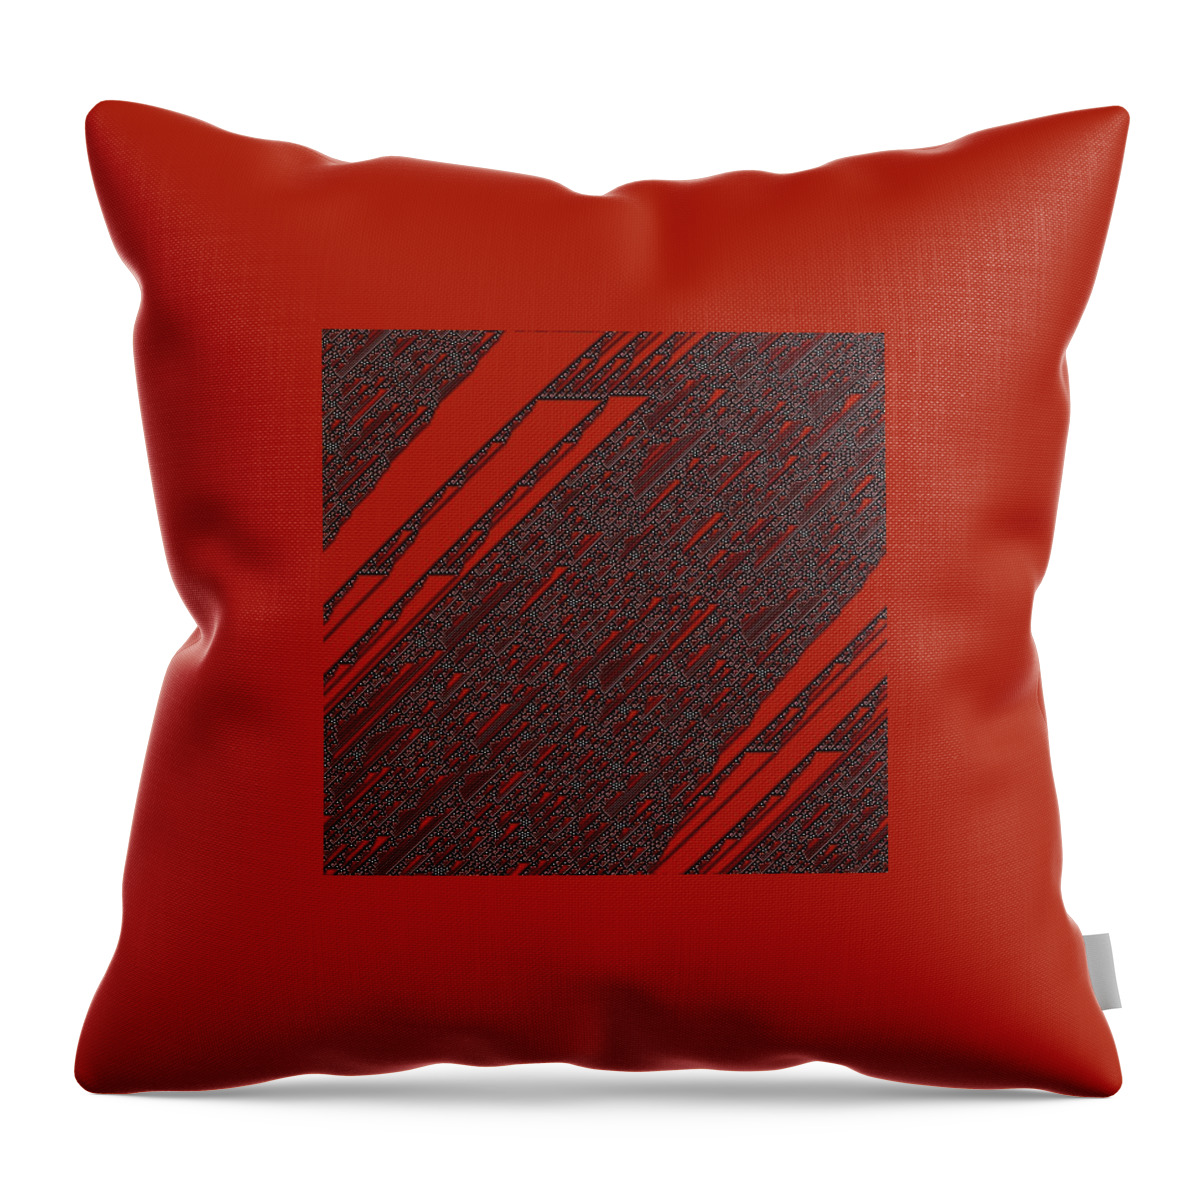 Cellular Automation Throw Pillow featuring the digital art Deep Into Wolfram Rule 169 by Daniel Reed